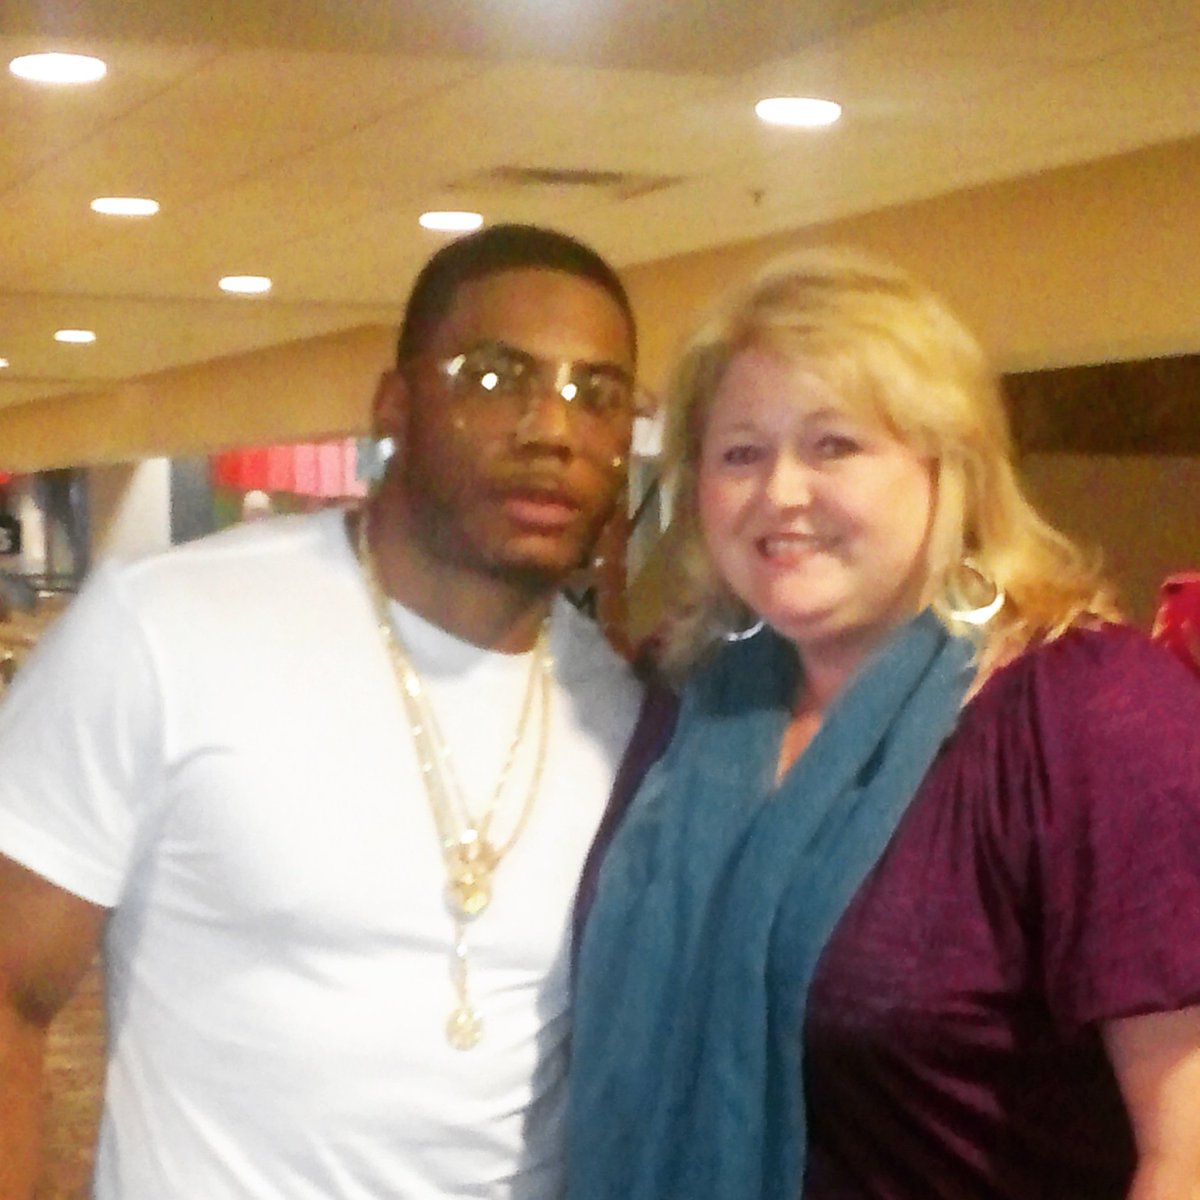 RT @Klackey622: I may be OLD but I love me some Nelly @Nelly_Mo @hornets https://t.co/lbVWgwaA82